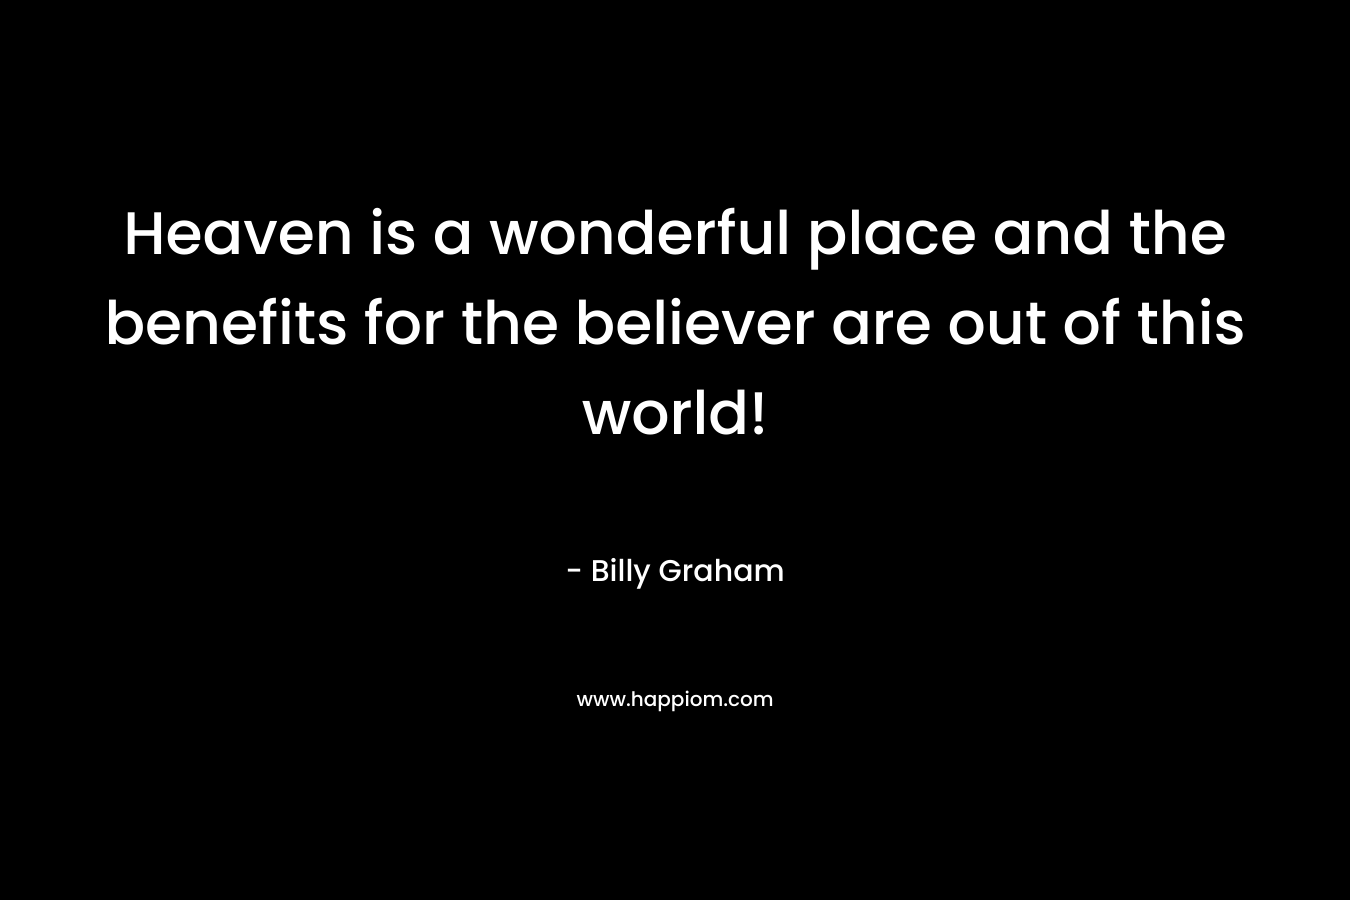 Heaven is a wonderful place and the benefits for the believer are out of this world!